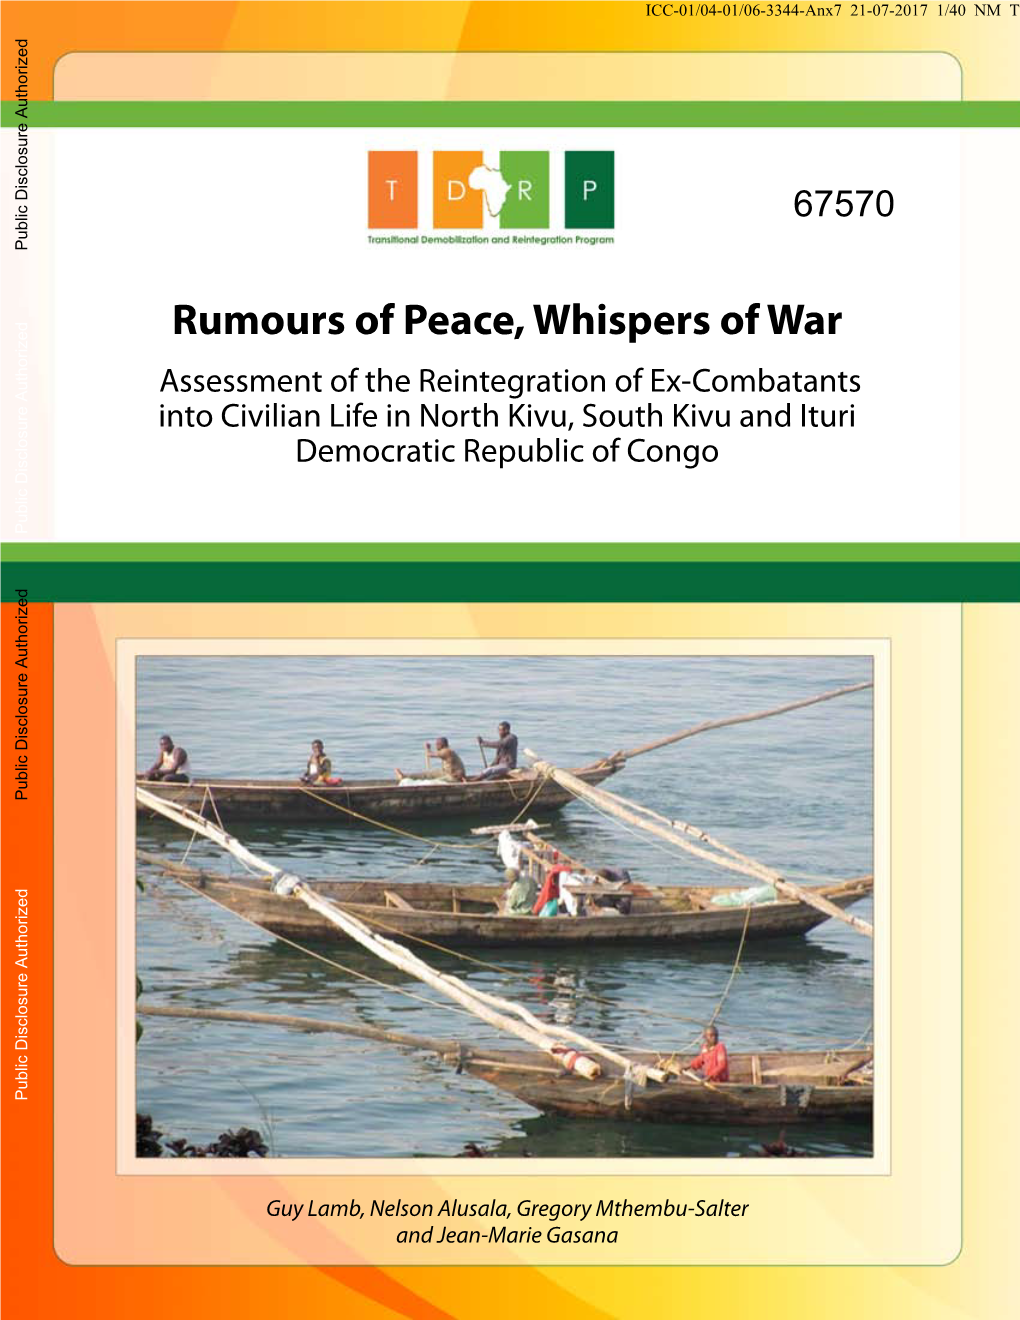 Rumours of Peace, Whispers of War Assessment of the Reintegration of Ex-Combatants Into